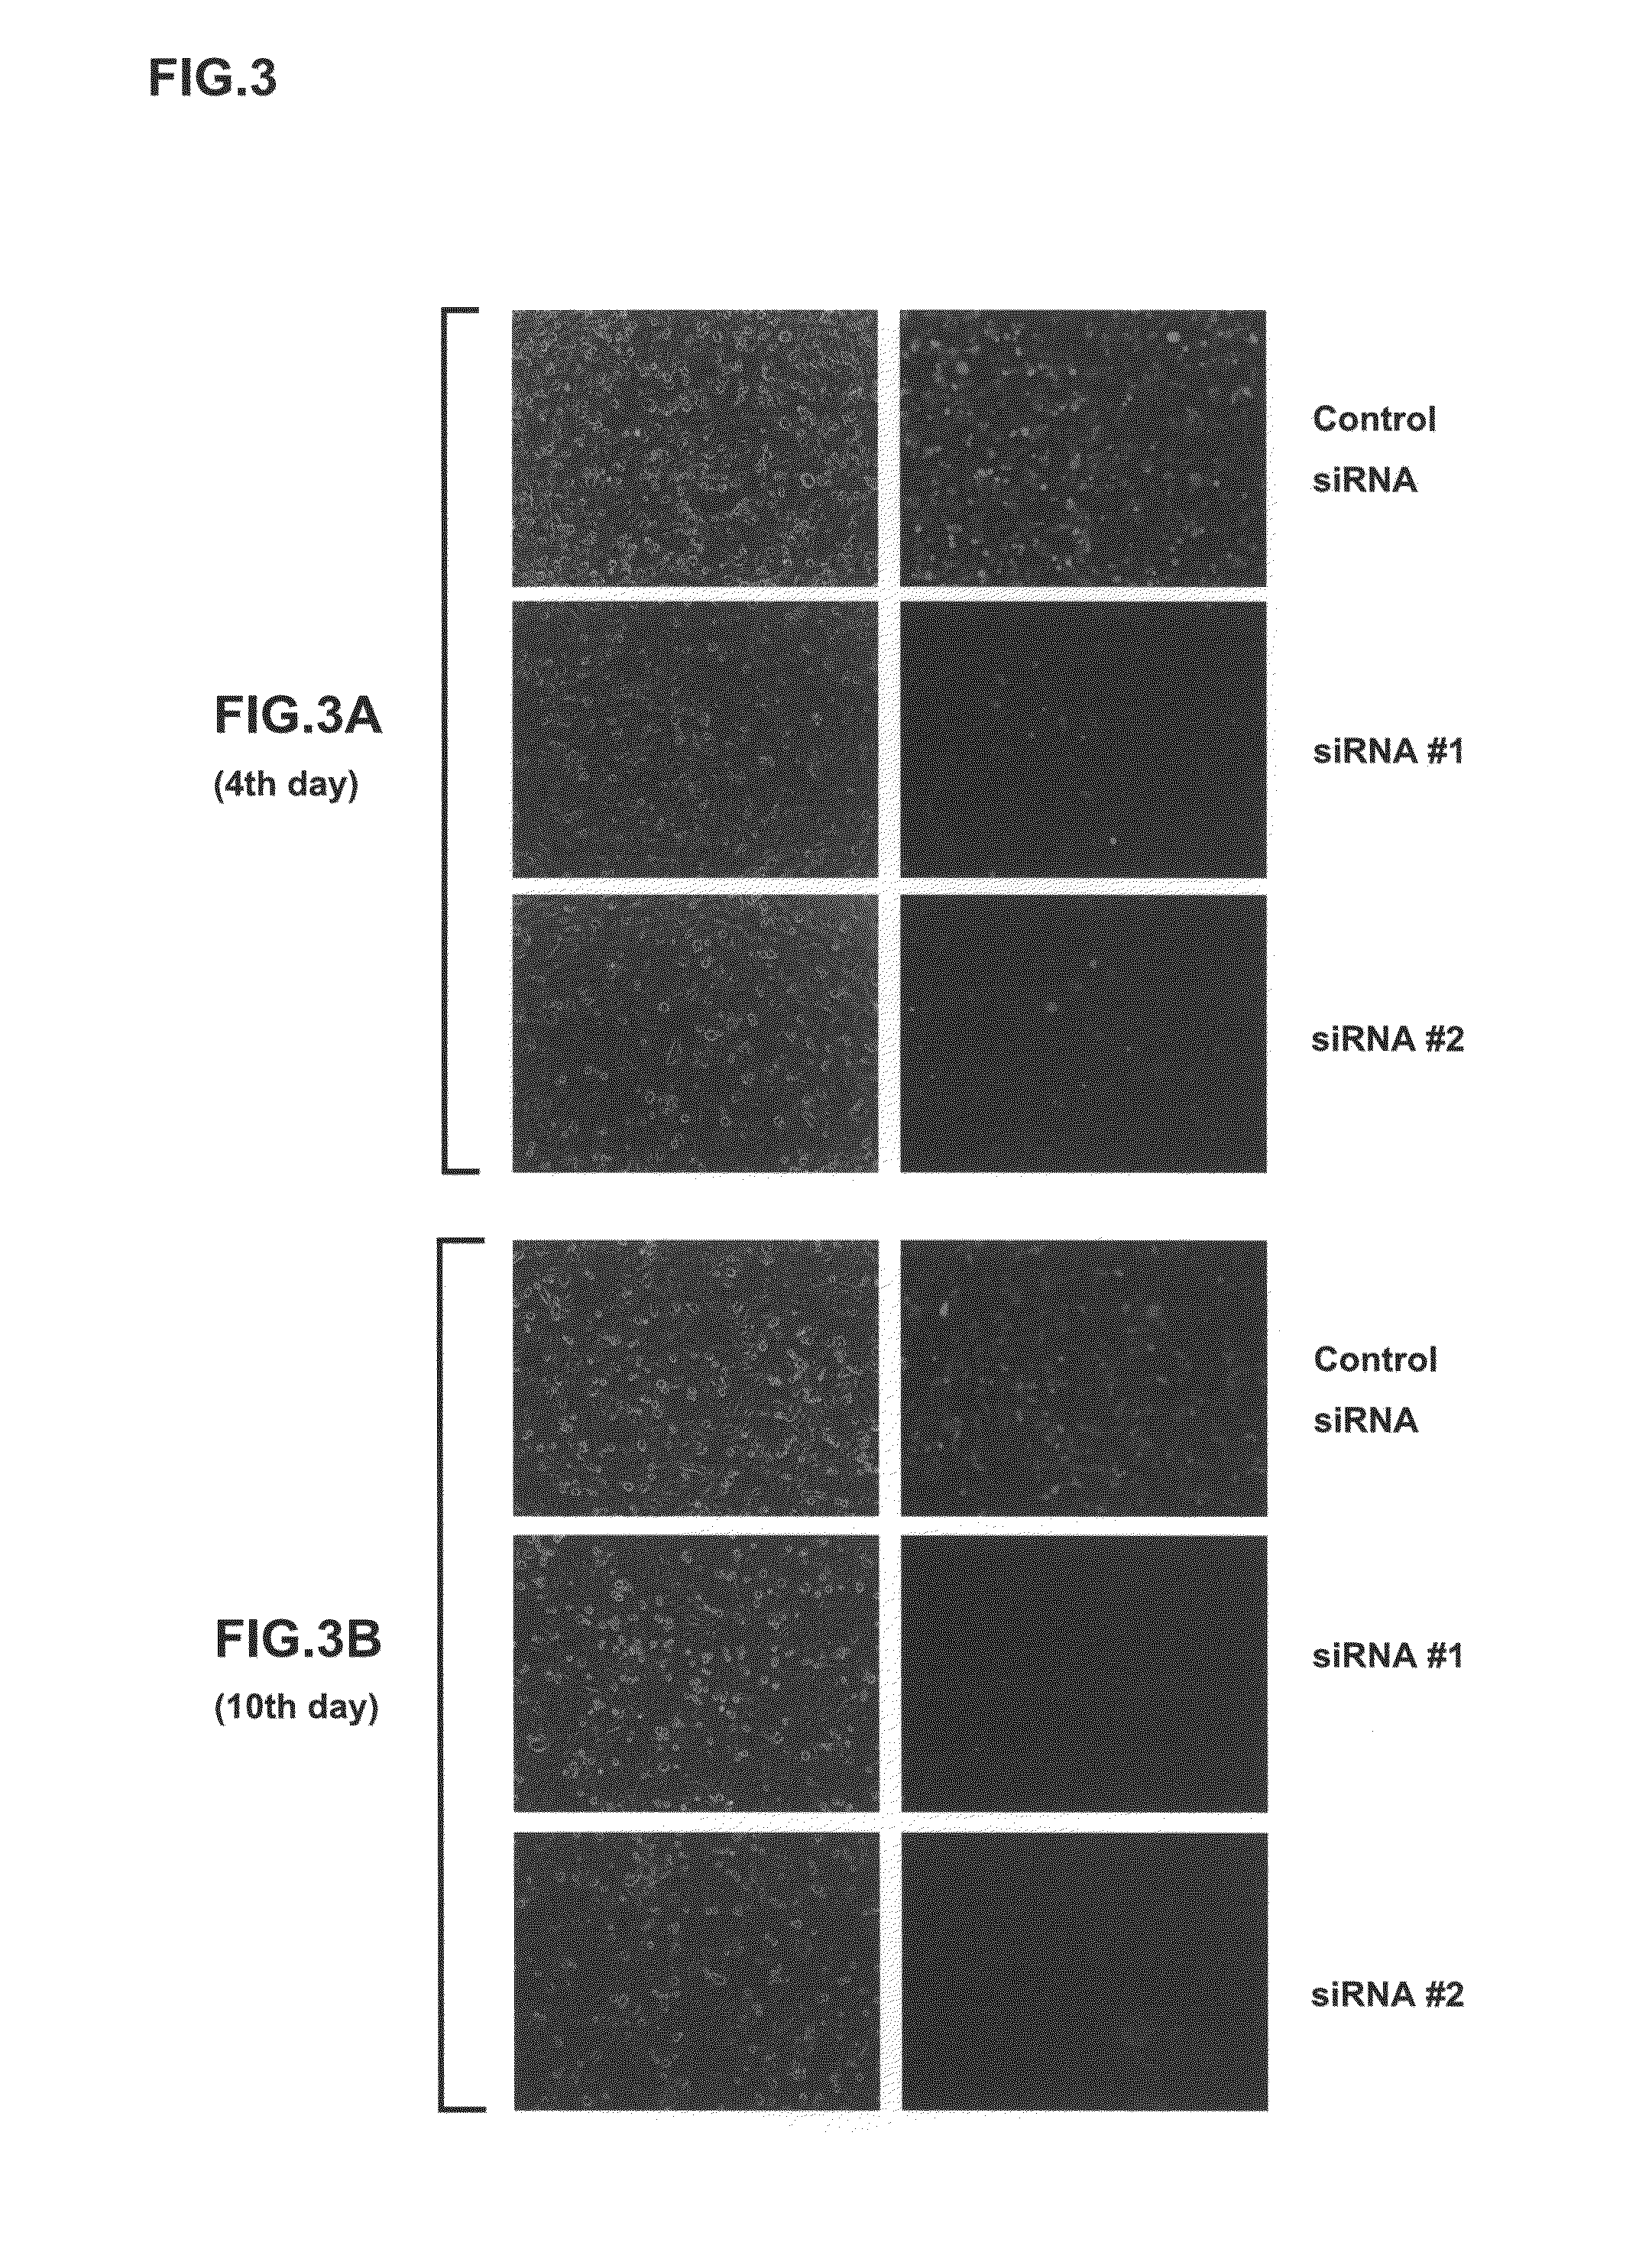 Vectors for generating pluripotent stem cells and methods of producing pluripotent stem cells using the same